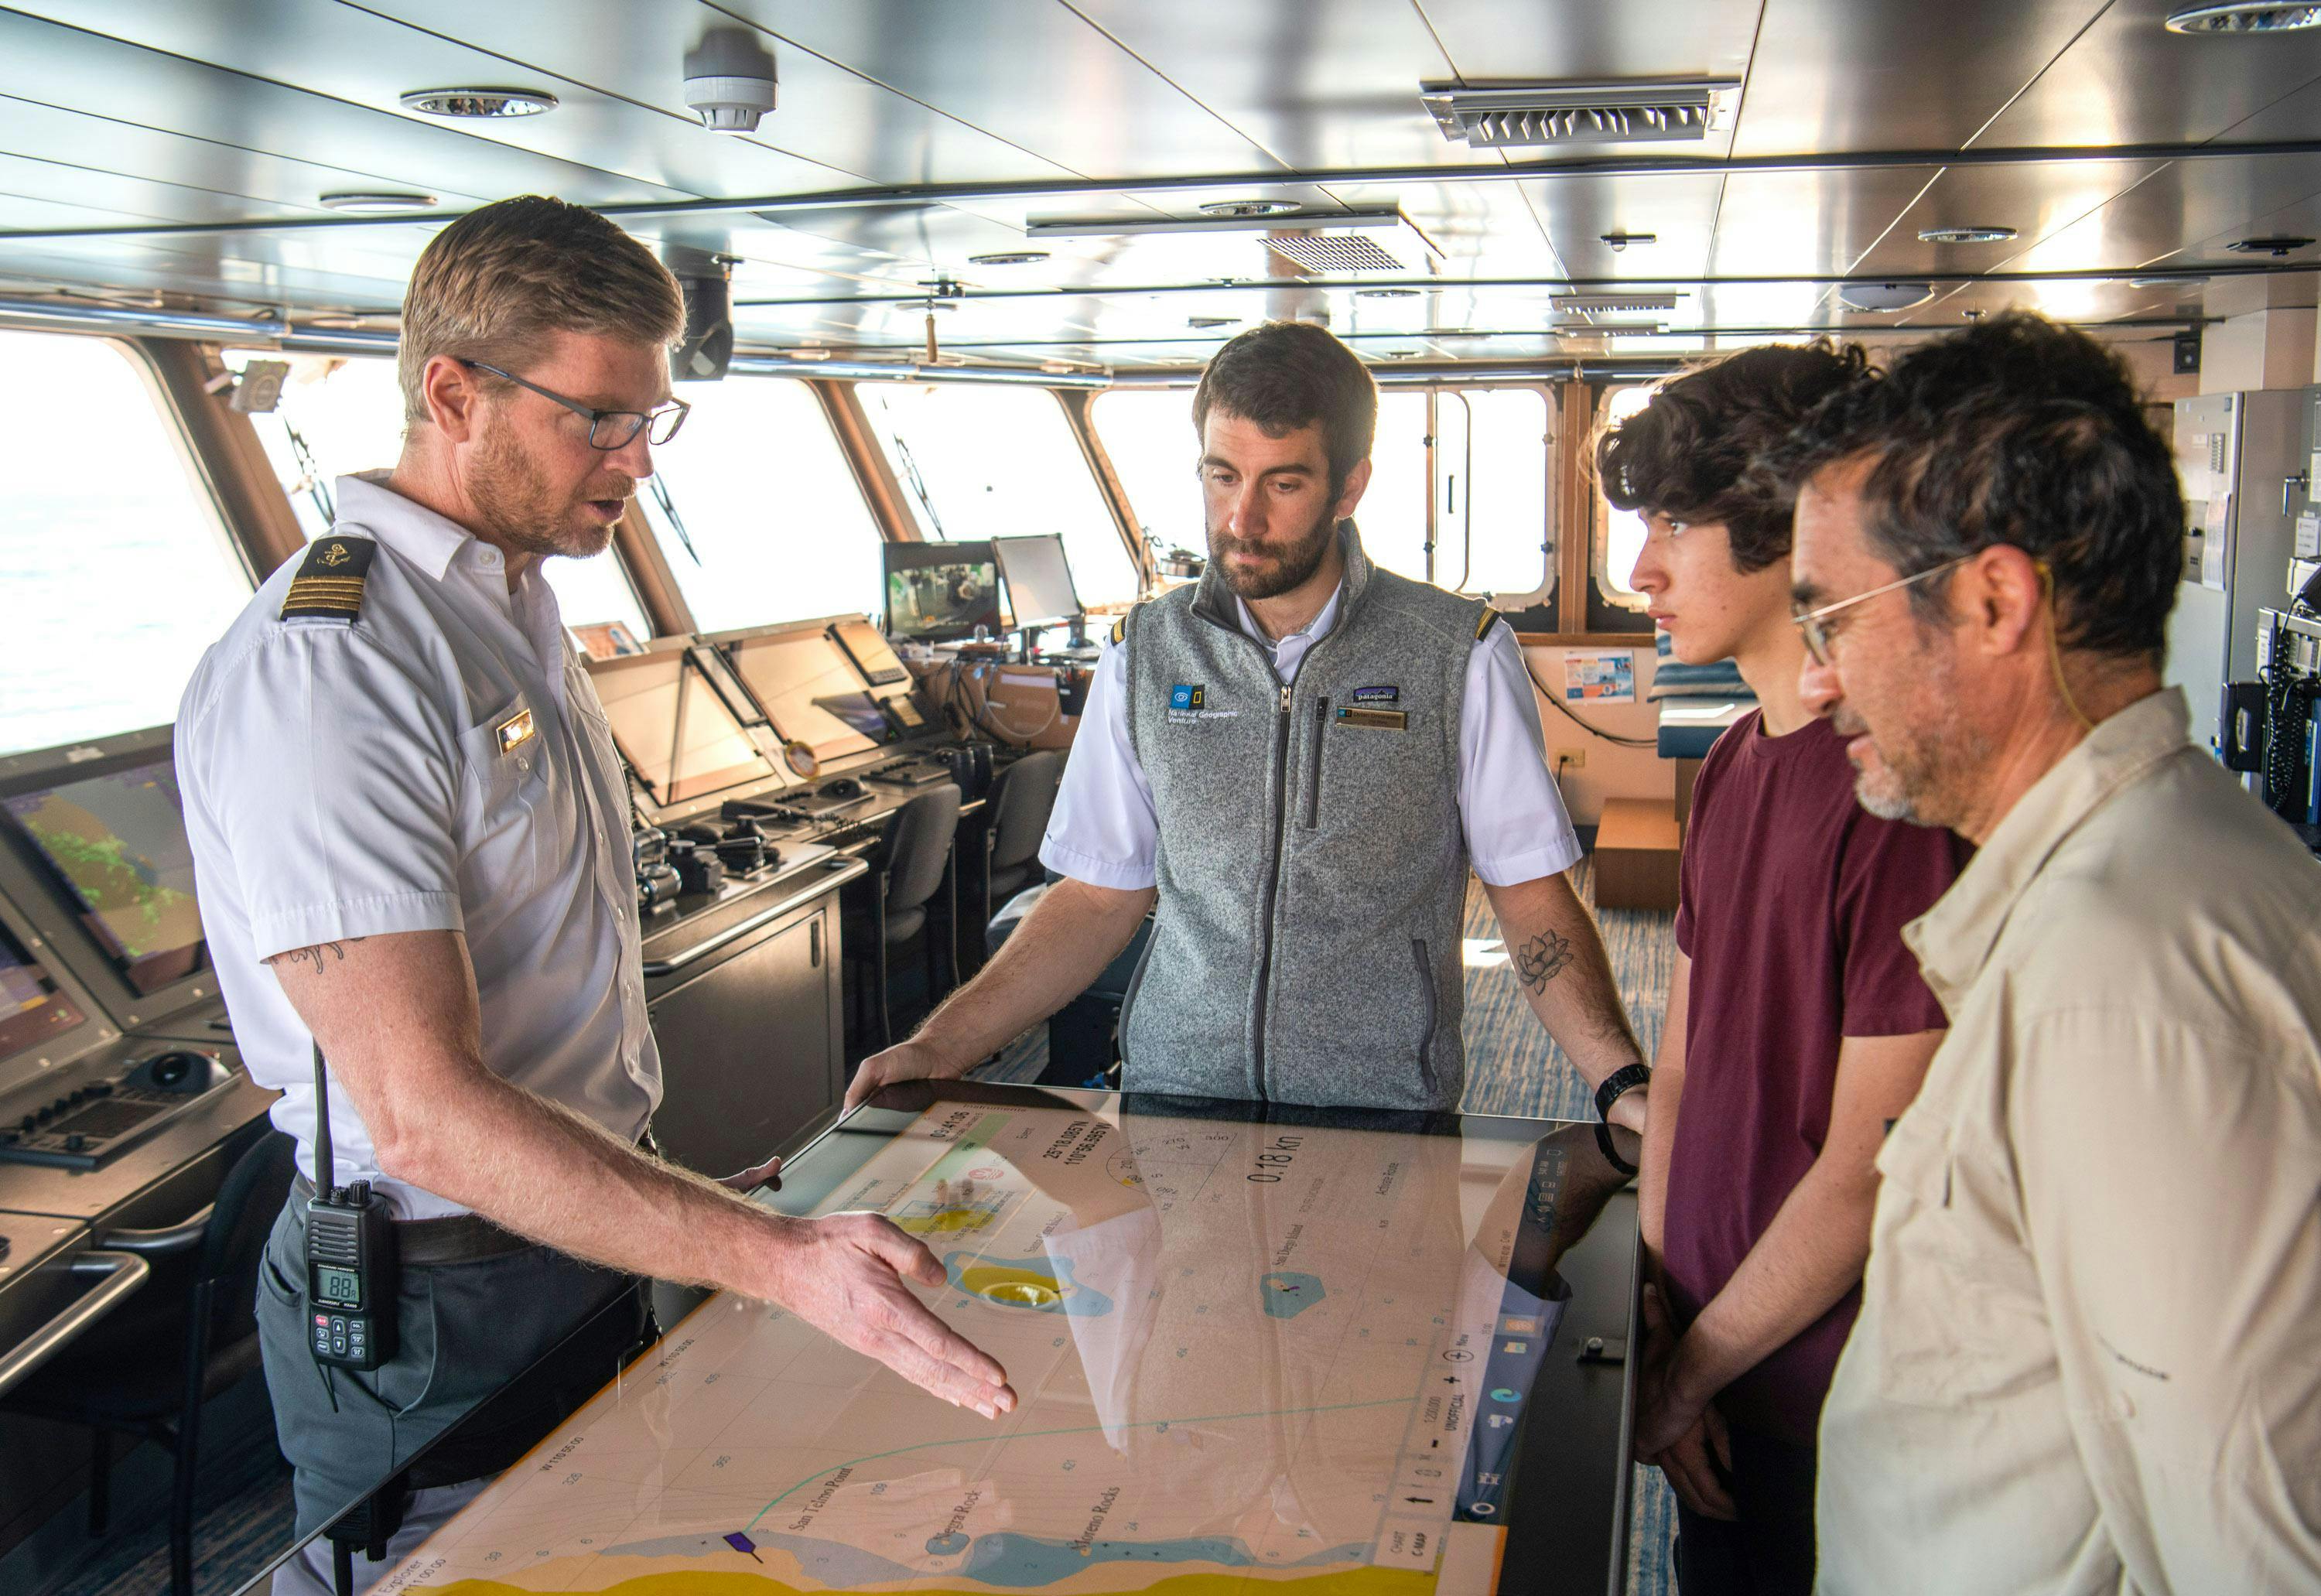 Captain Andrew Cook with guests and Staff on the Bridge of National Geographic Venture, Baja California, Mexico